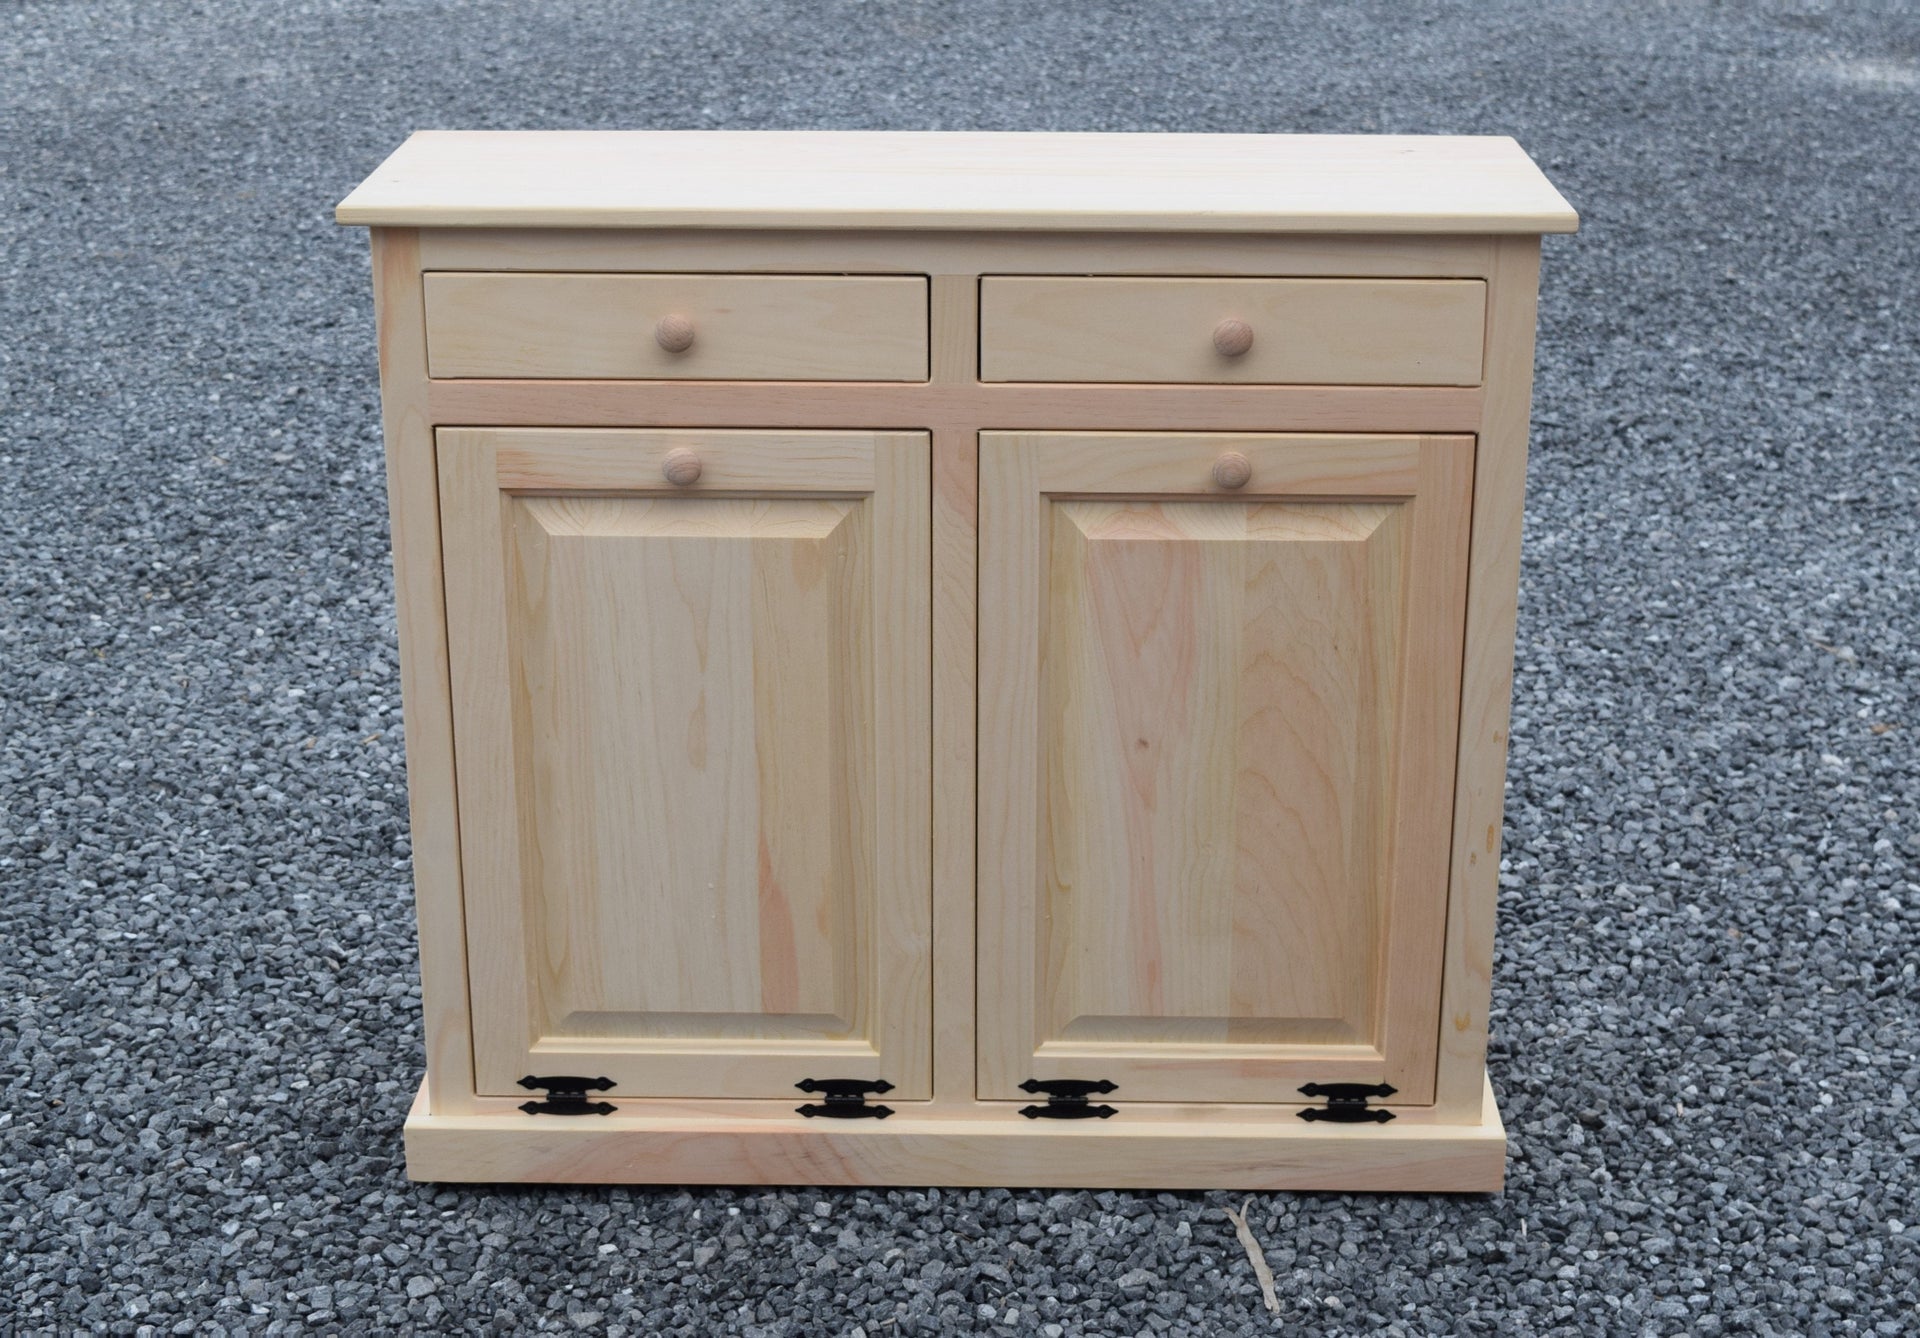 Double Trash Bin Cabinet EXTRA LARGE Rustic Double Trash Cabinet Trash Can  Amish Handmade Made in USA 